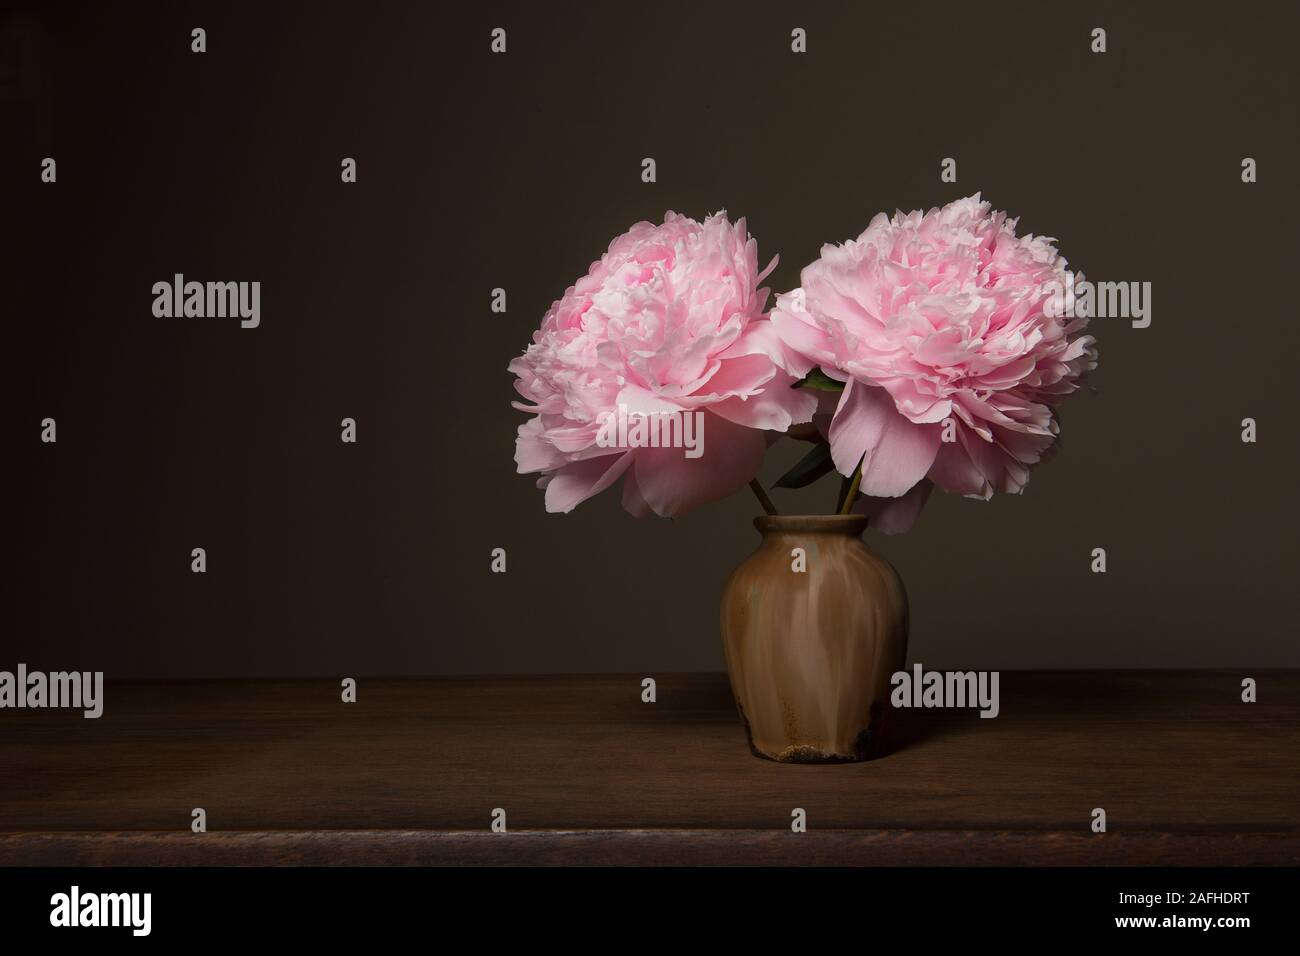 Still life with blooming peony roses in fine art style Stock Photo